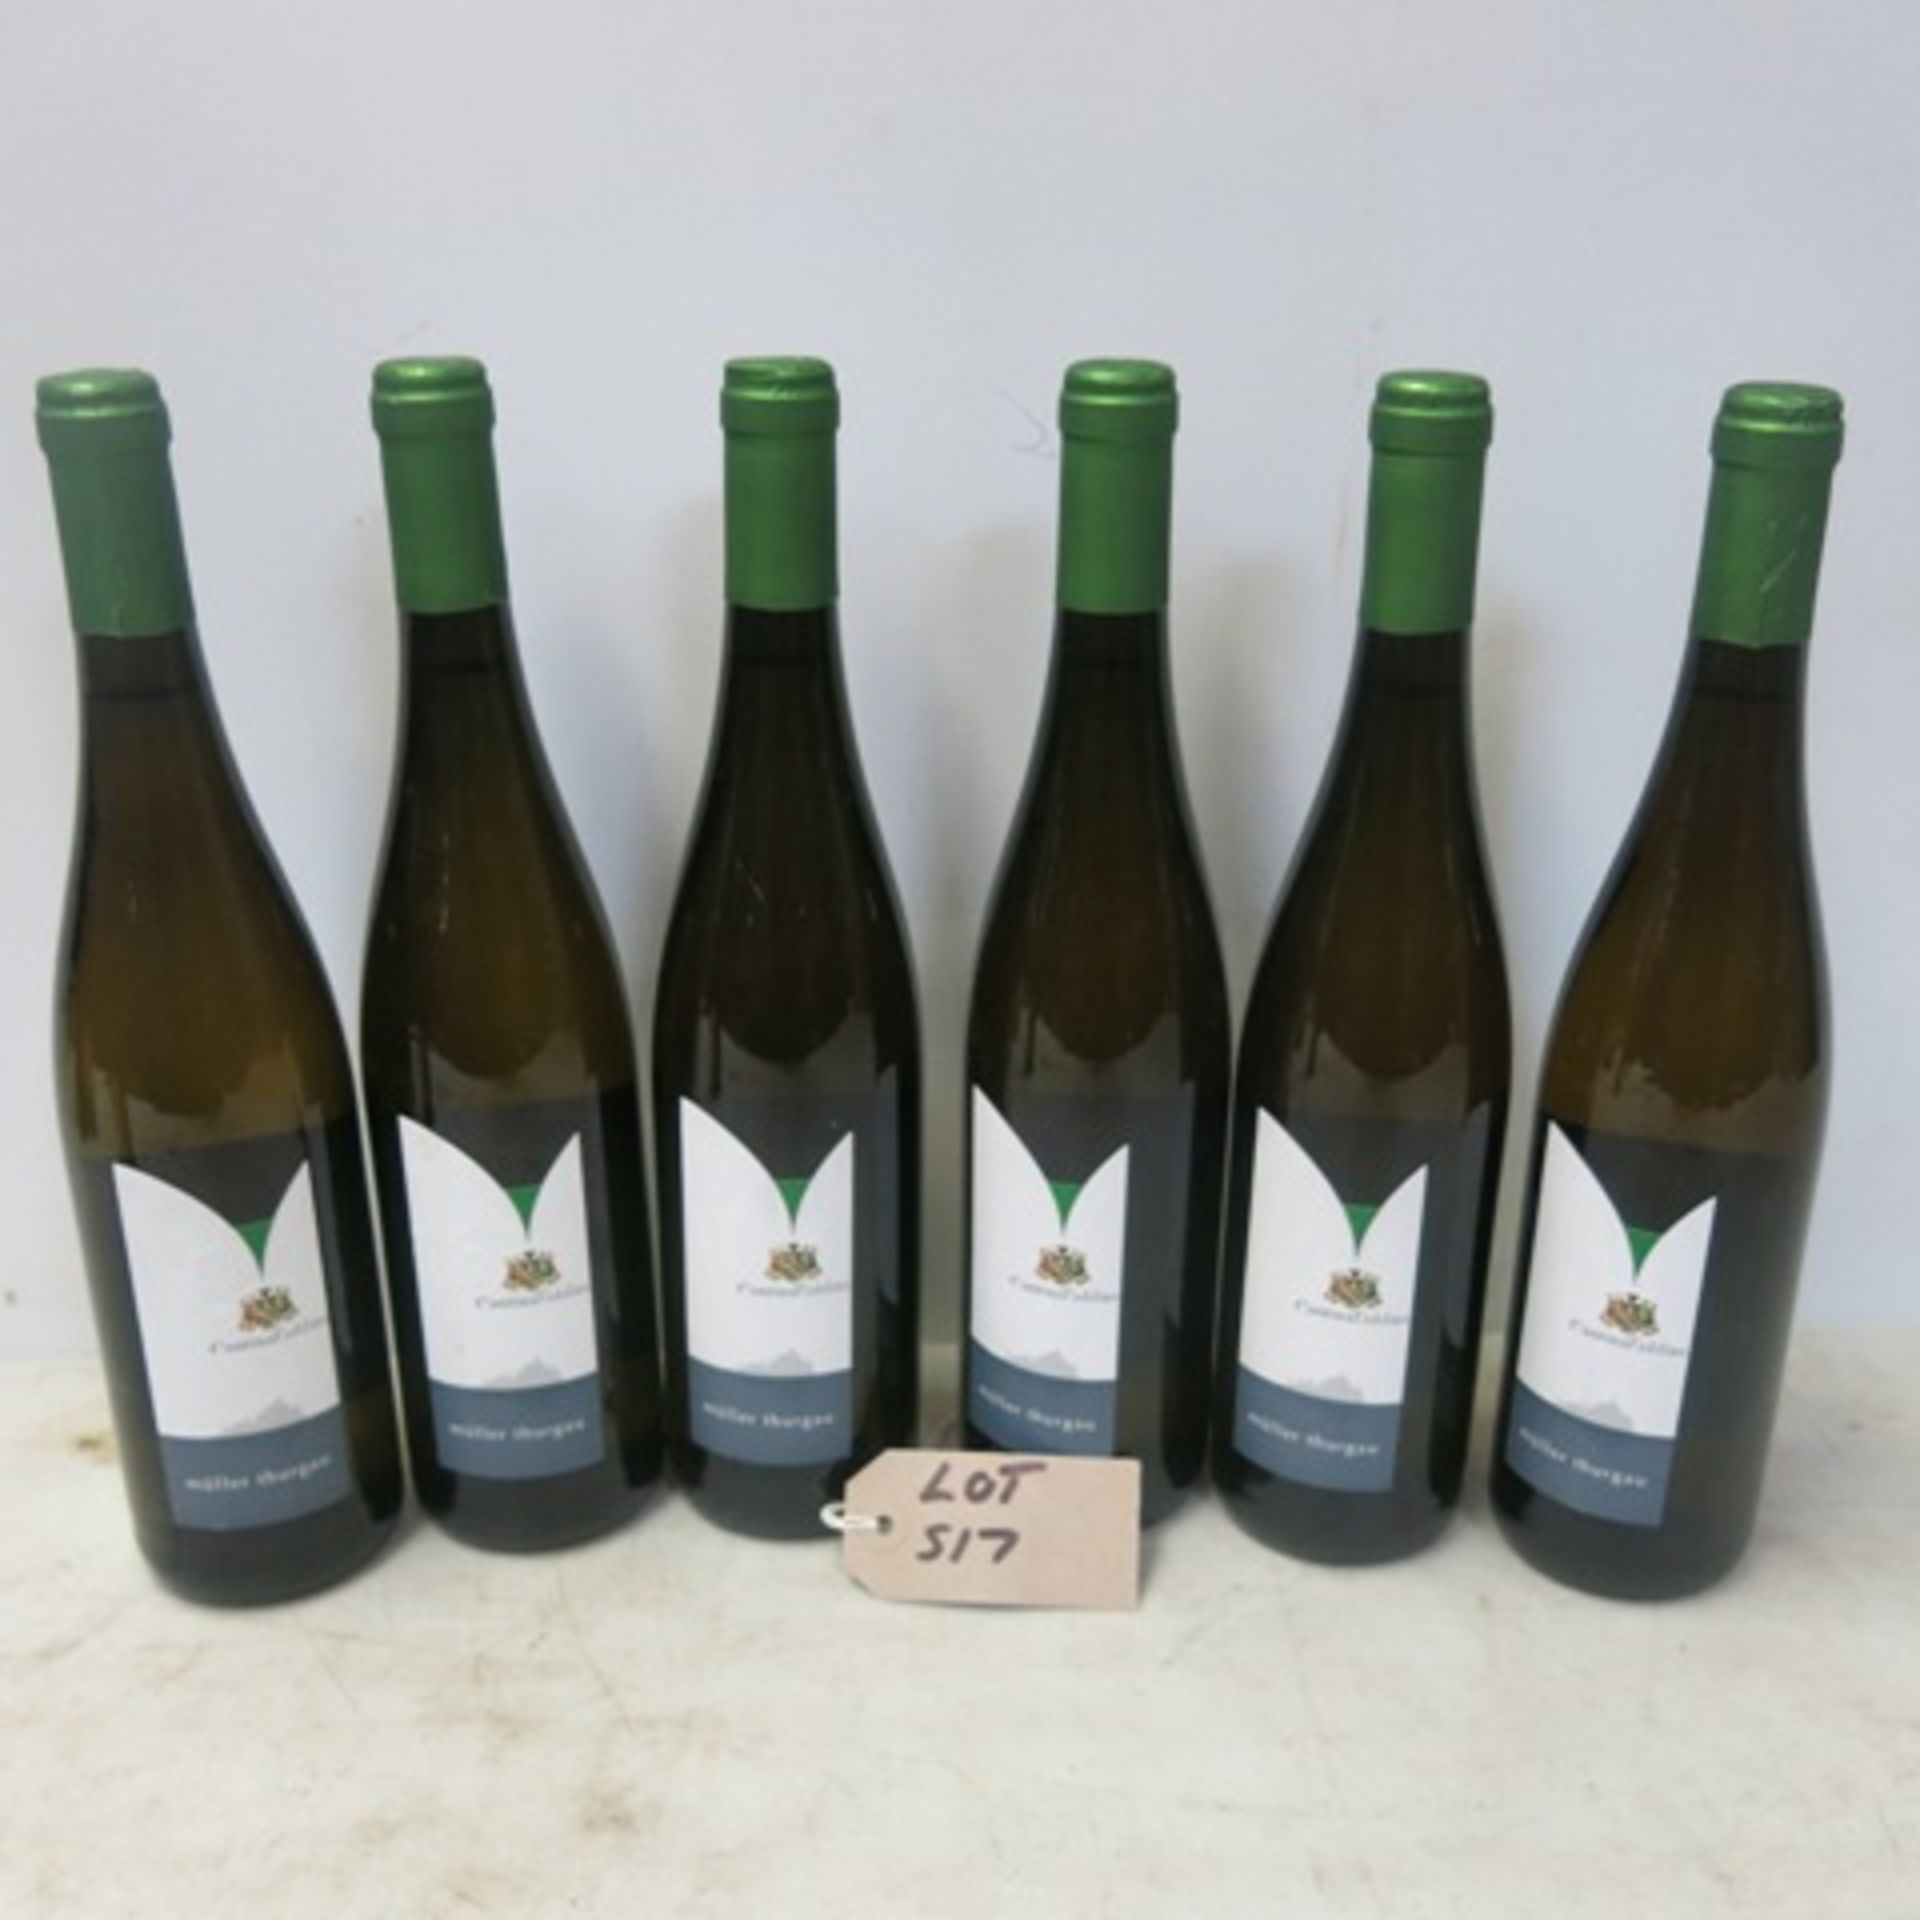 6 x Bottles of Cantina Toblino Muller Thurgau White Wine, Year 2016. Total RRP £80.00